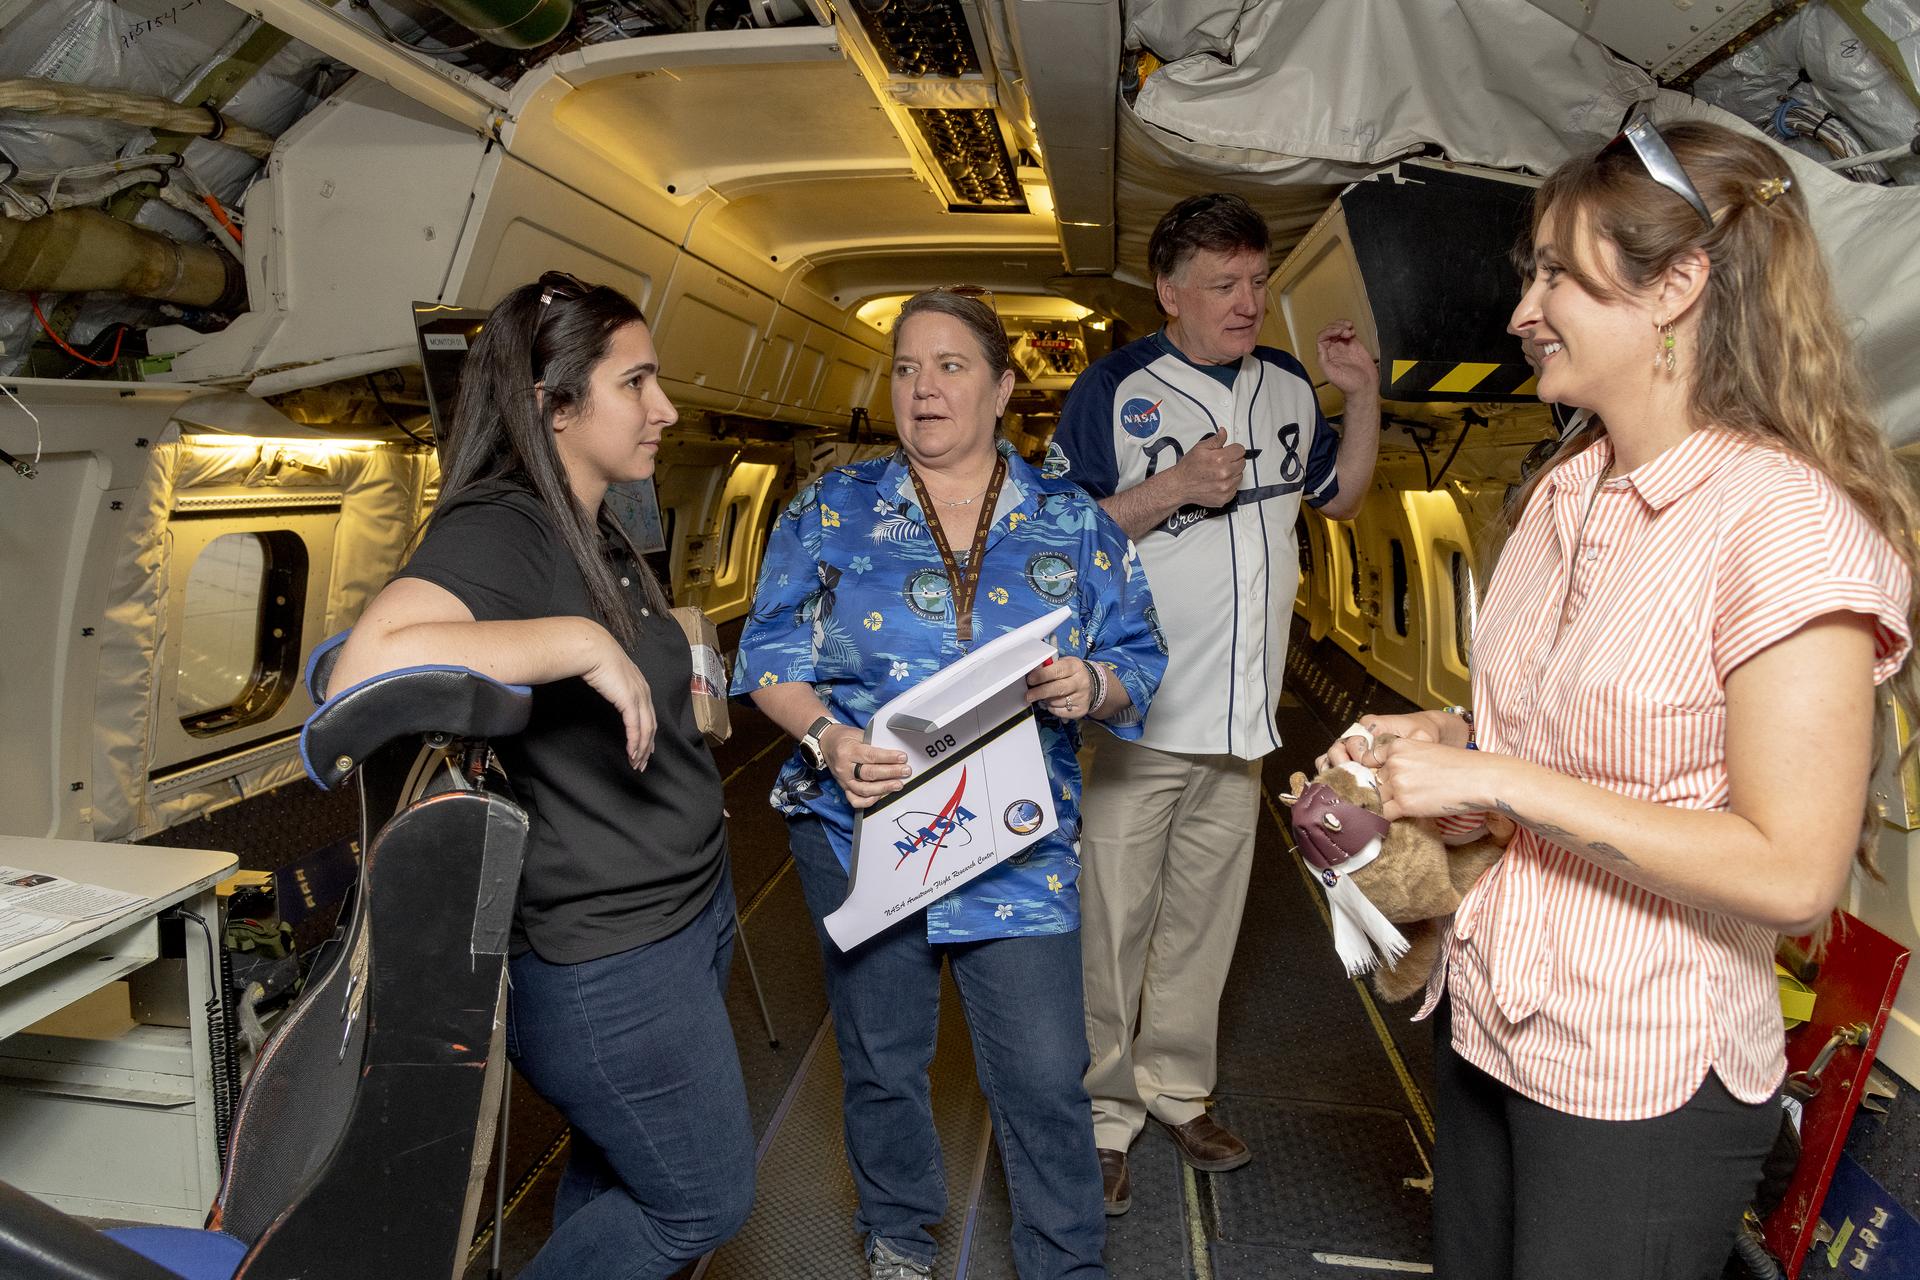 Four people converse onboard an aircraft.